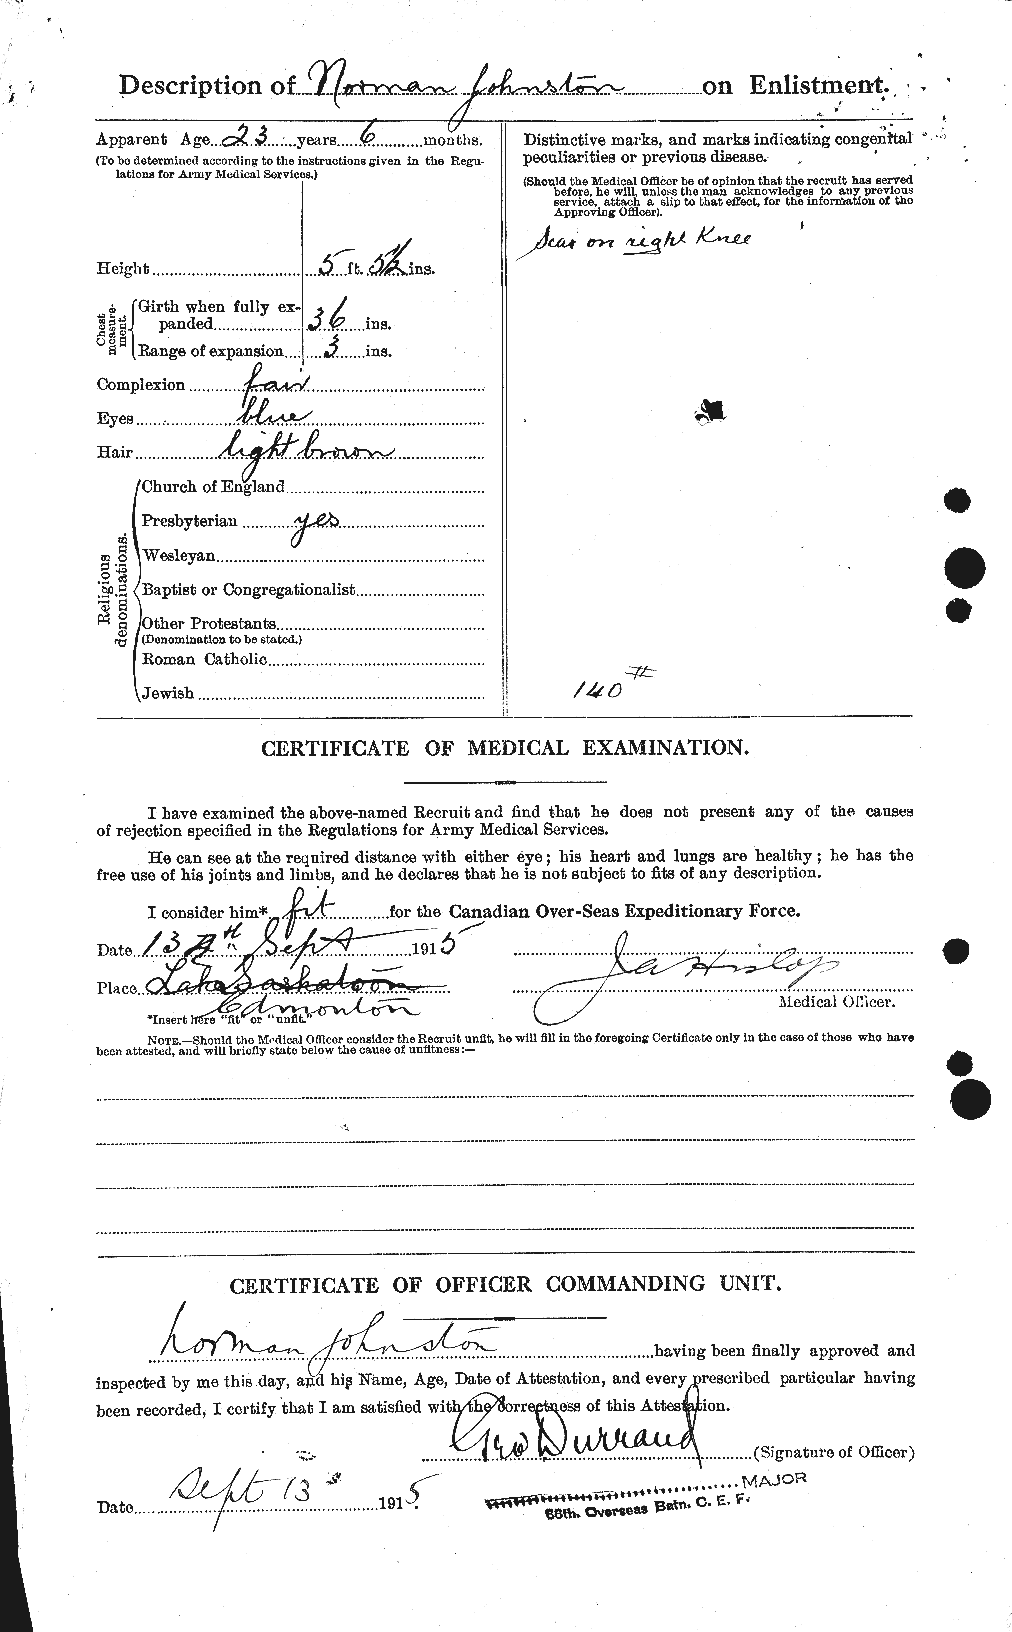 Personnel Records of the First World War - CEF 423004b